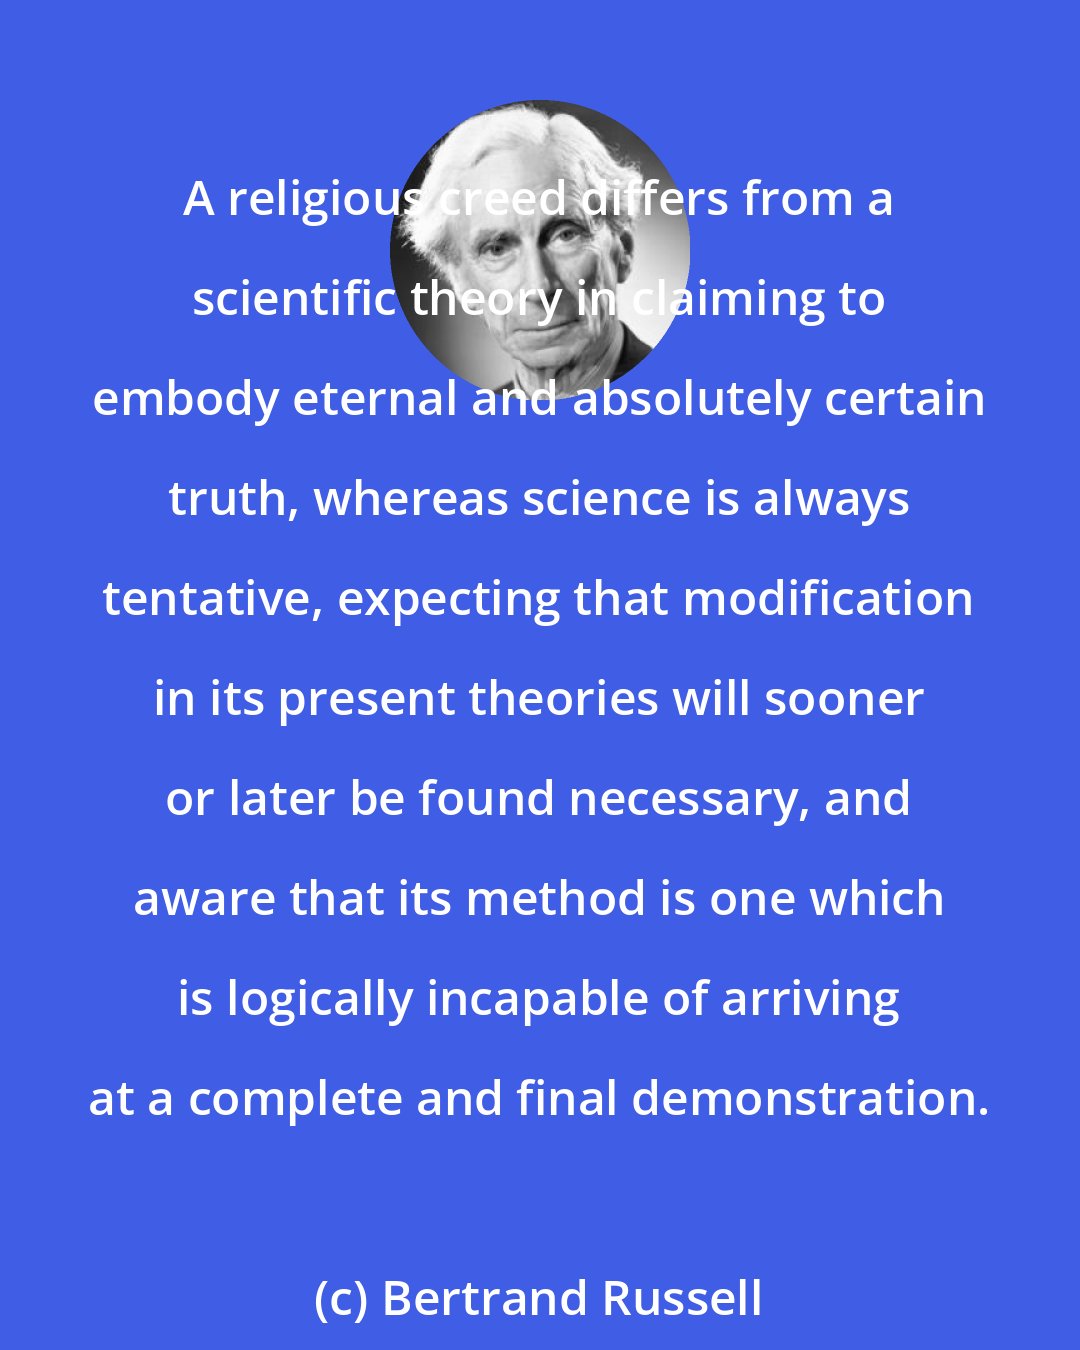 Bertrand Russell: A religious creed differs from a scientific theory in claiming to embody eternal and absolutely certain truth, whereas science is always tentative, expecting that modification in its present theories will sooner or later be found necessary, and aware that its method is one which is logically incapable of arriving at a complete and final demonstration.